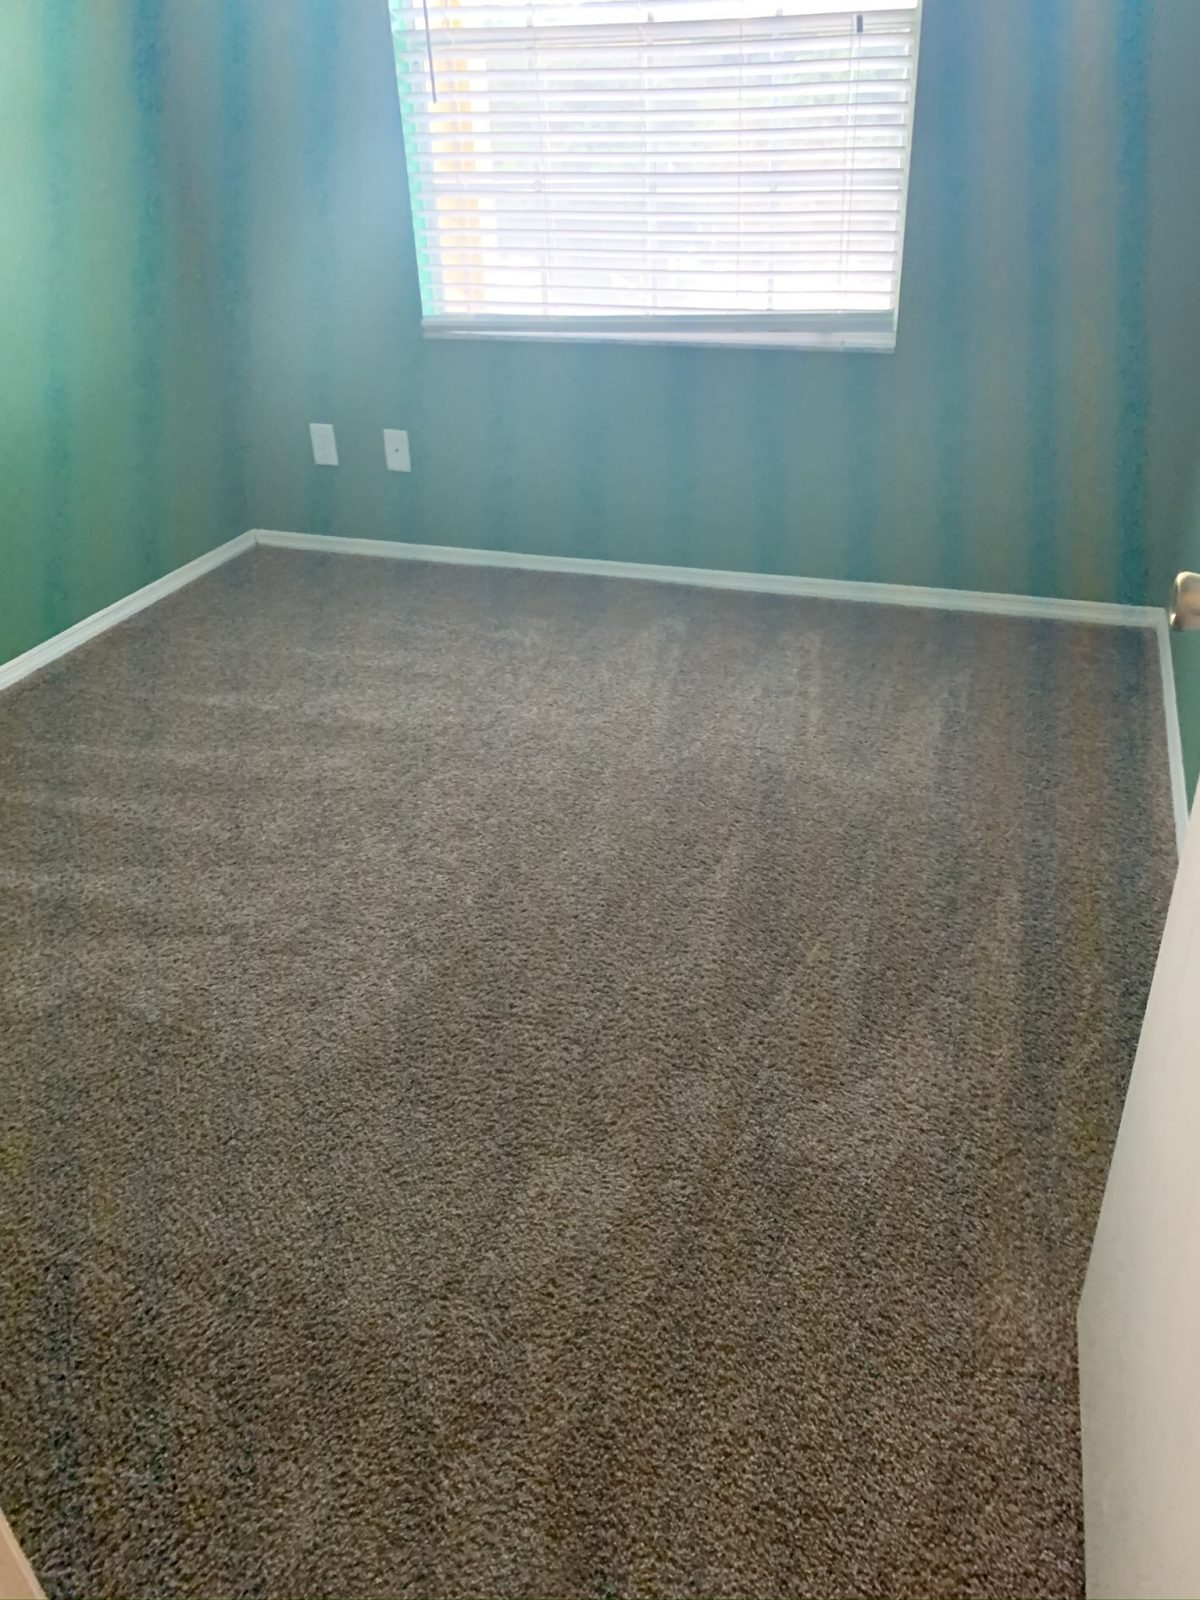 Professional Carpet Cleaning Dunedin Florida by Howards Cleaning Service